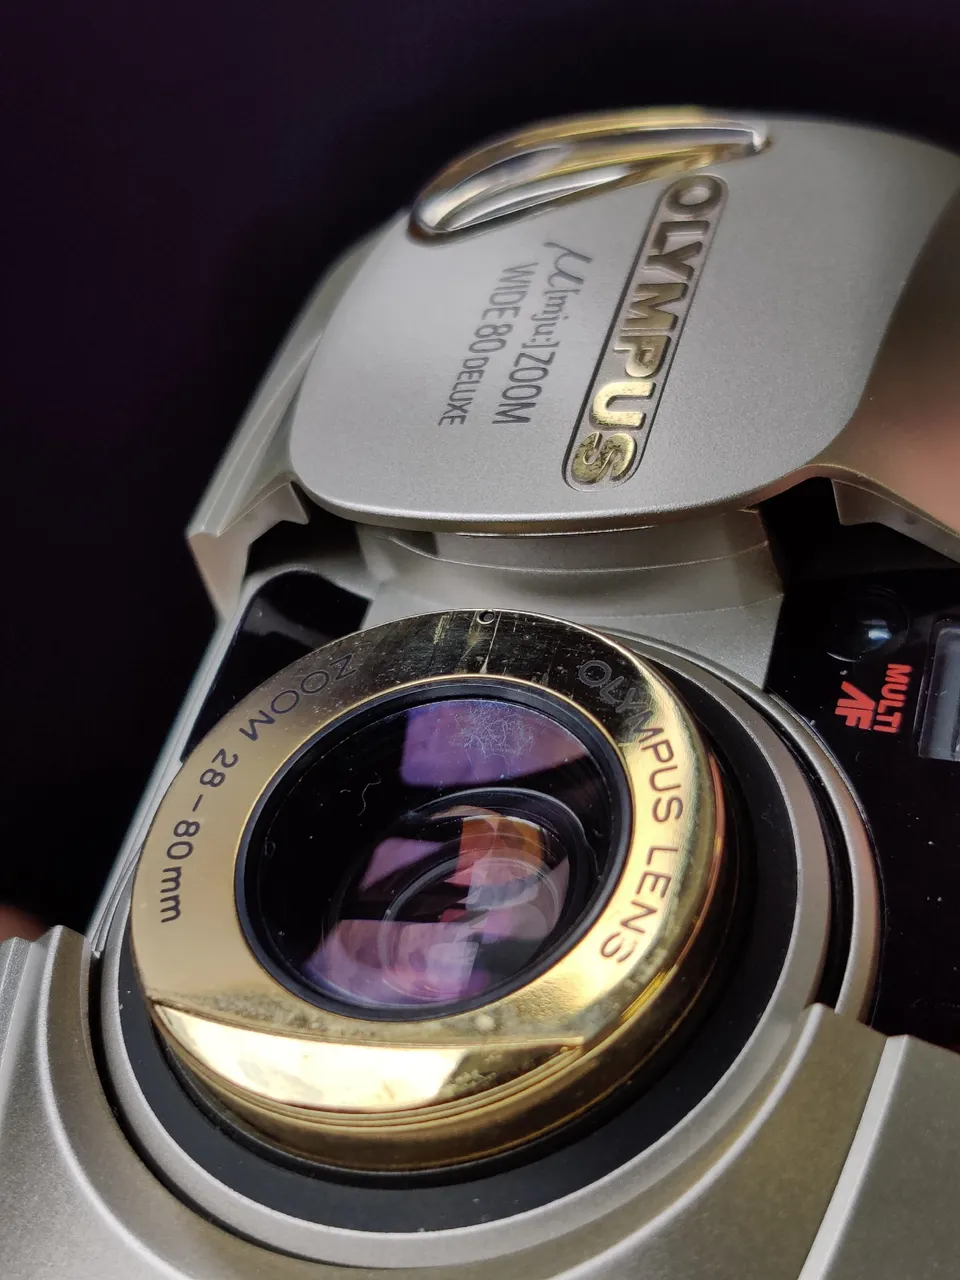 Close-up of the Mju Zoom Deluxe, with fungus on the lens clearly seen